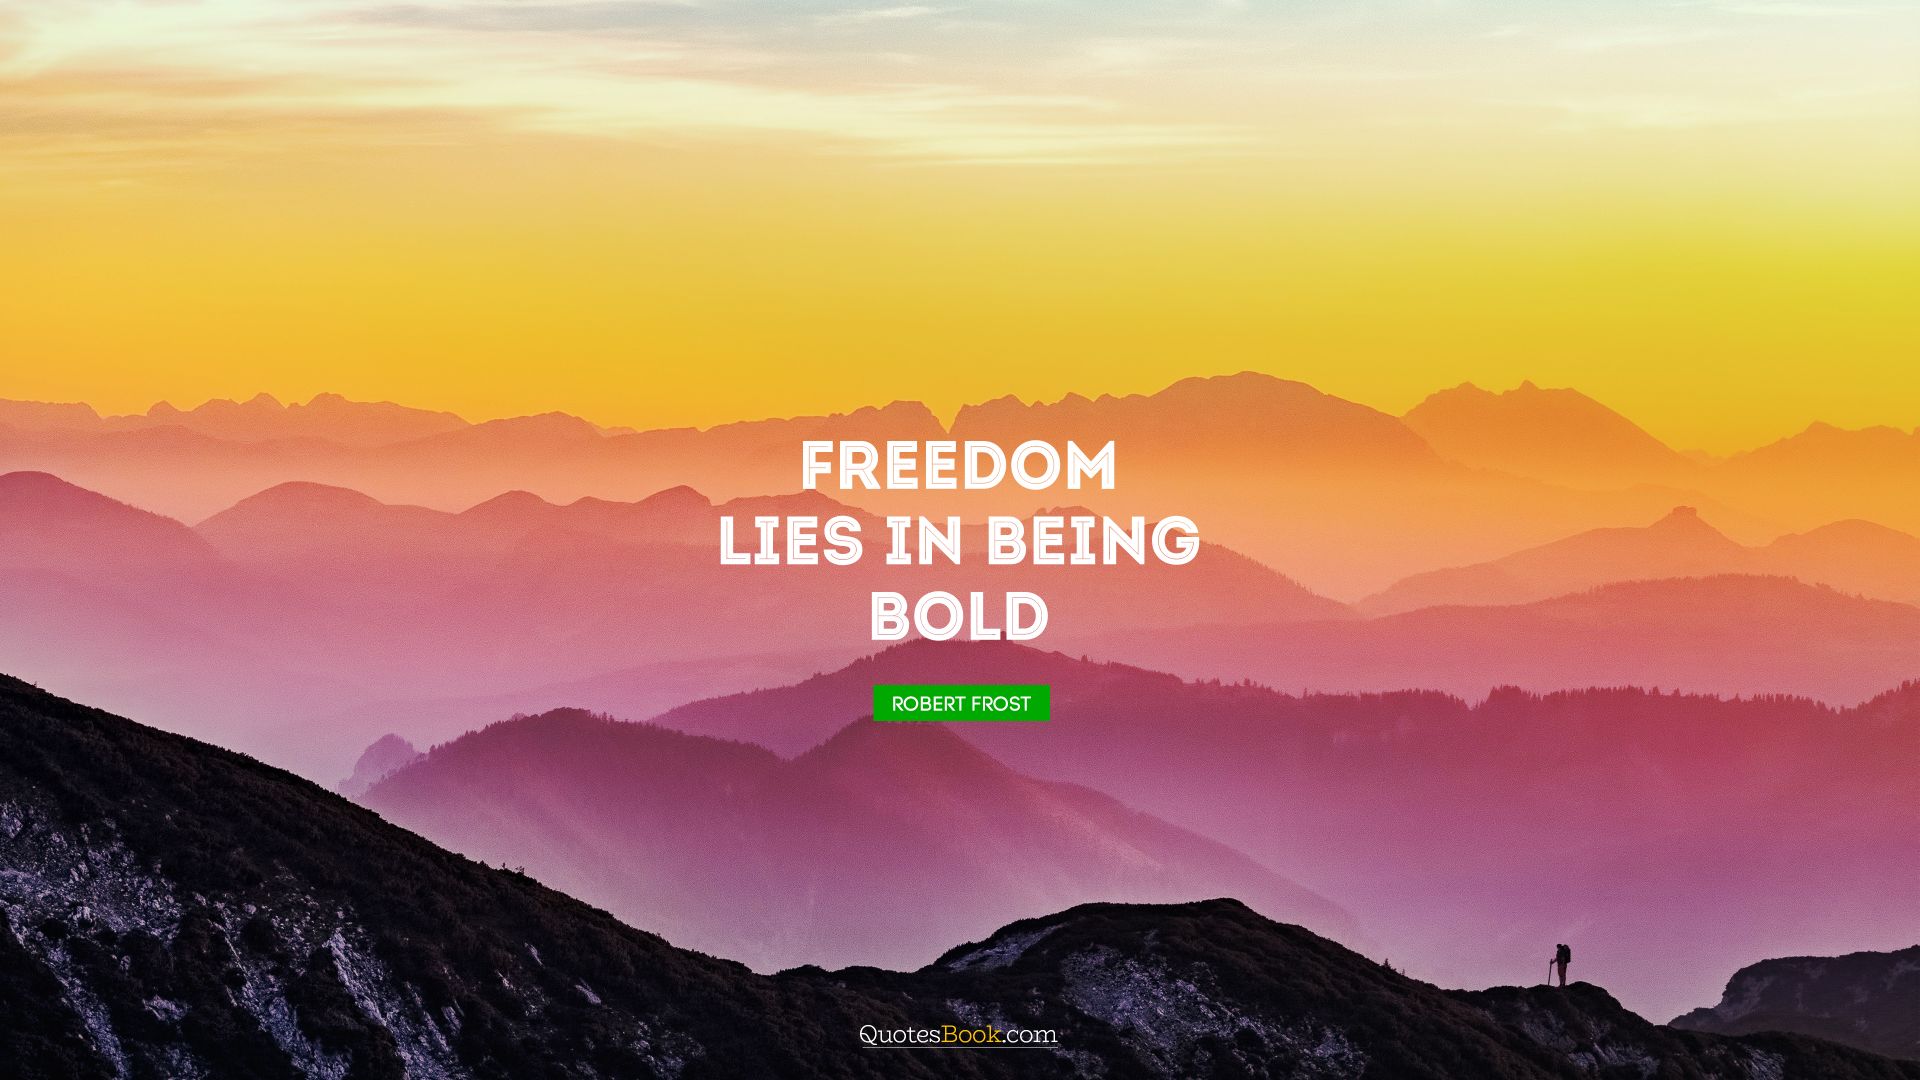 Freedom lies in being bold. - Quote by Robert Frost